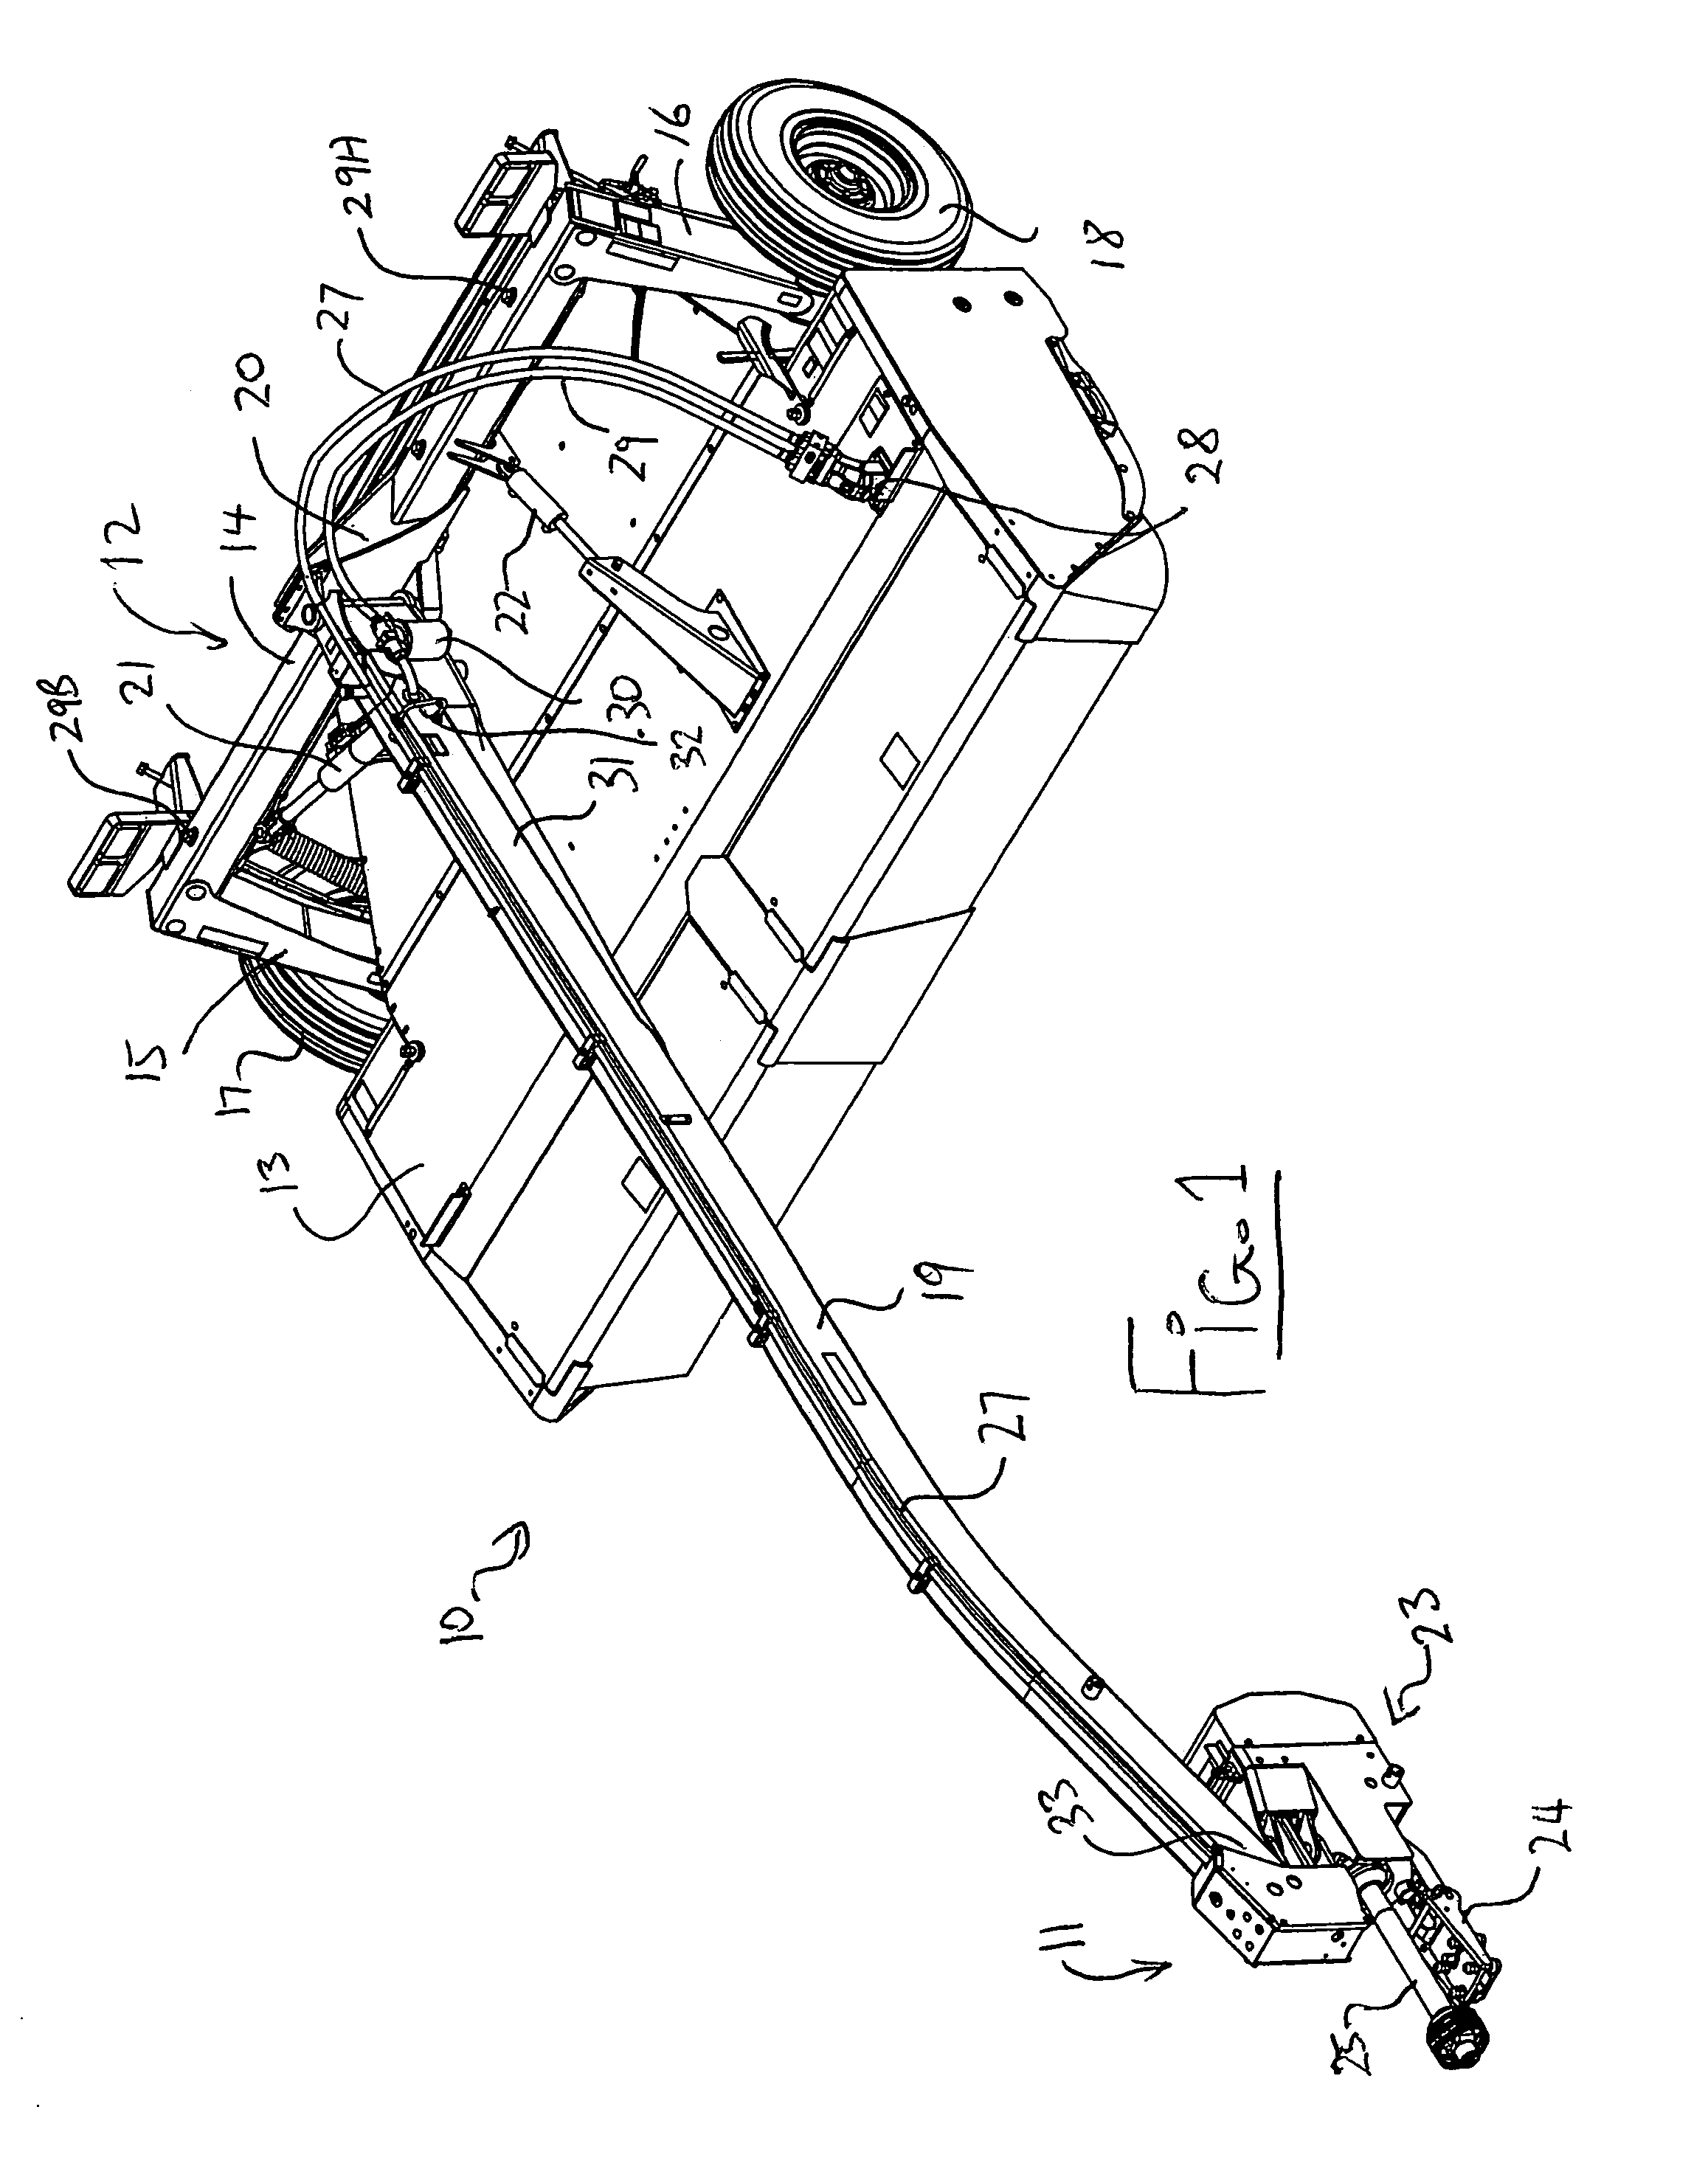 Connection of the hitch arm of a pull-type crop harvesting machine to a tractor